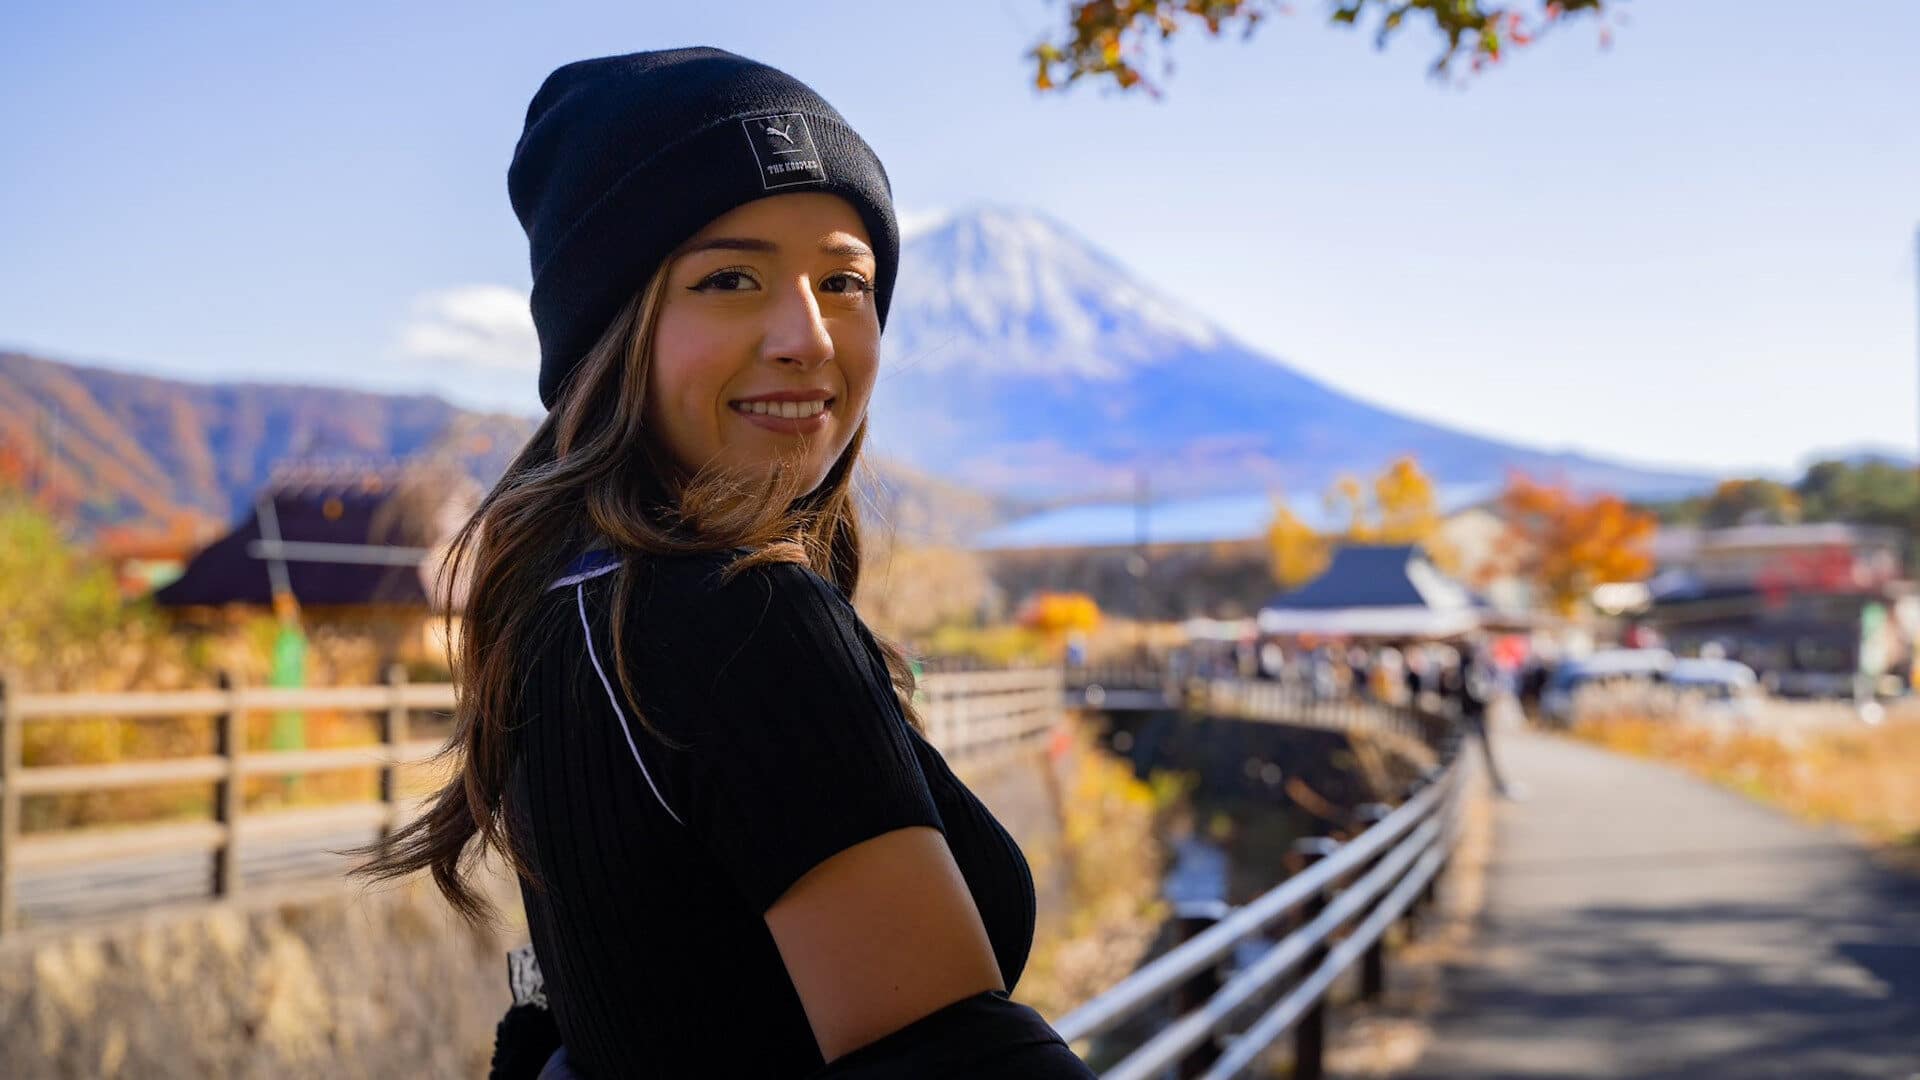 Who is Pokimane? Net worth, earnings, streaming setup, and more | The Loadout